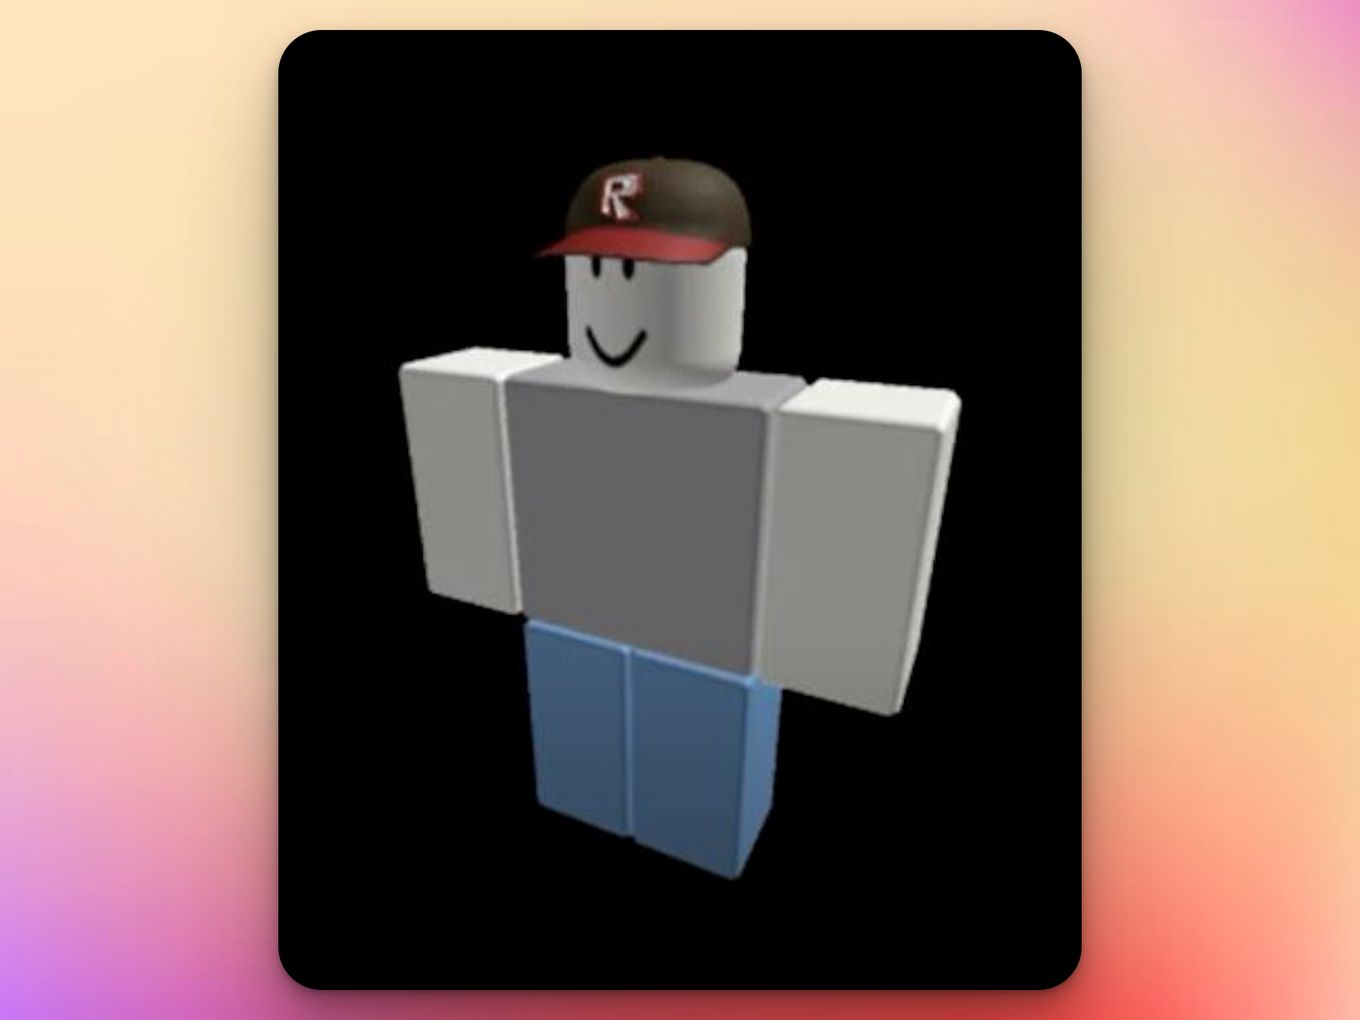 21 Classic Roblox Avatars Outfits [You'll Love to Use]